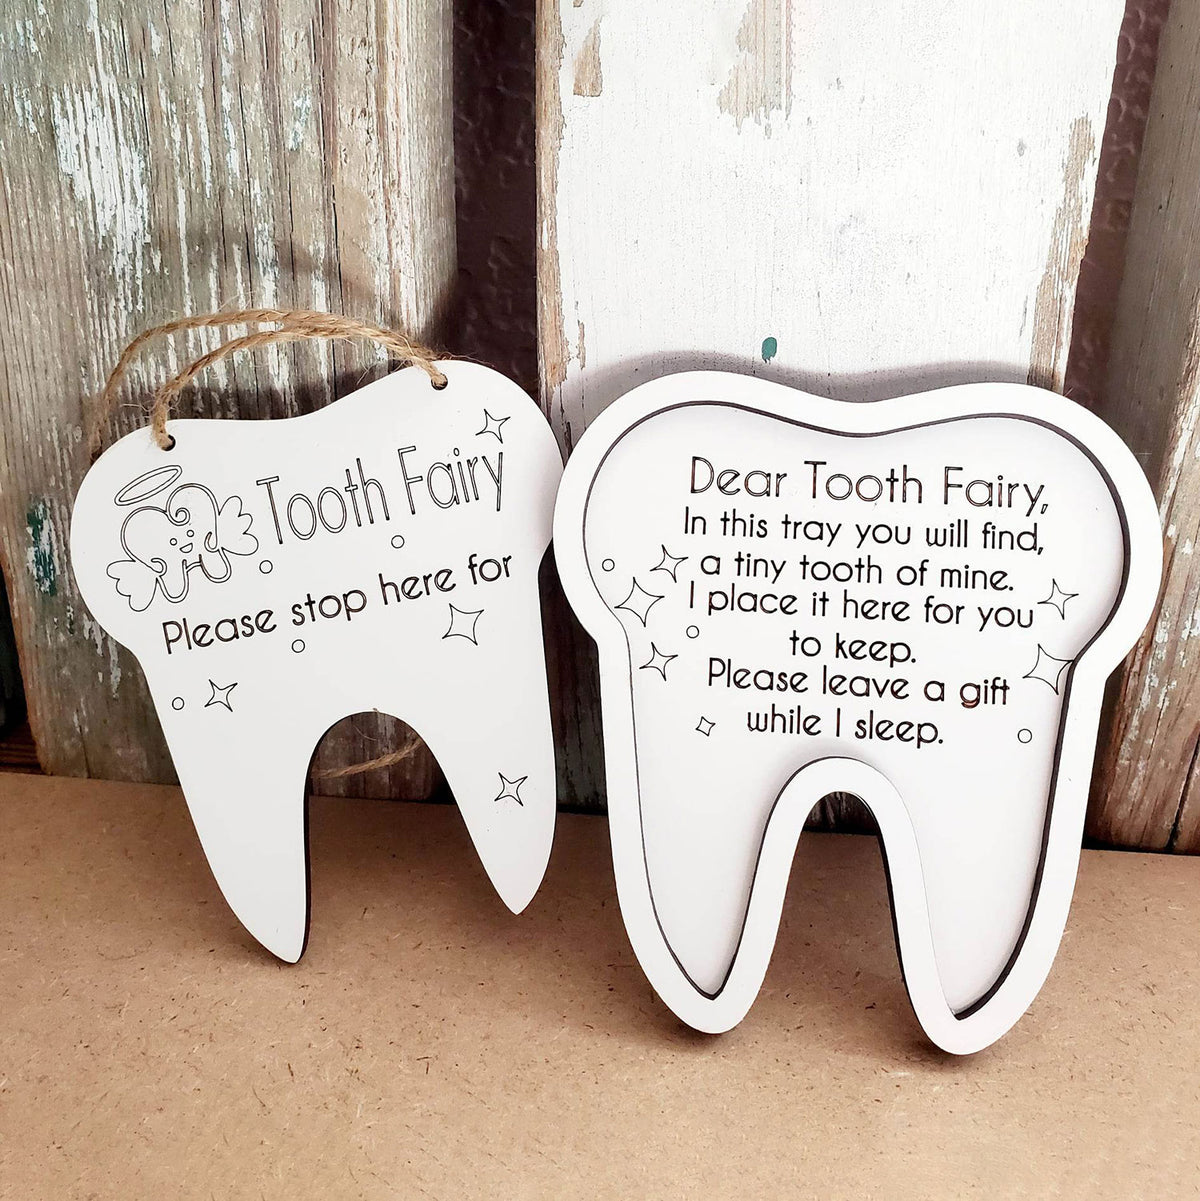 Customizable Tooth Fairy Pouch using the Cricut - Hey, Let's Make Stuff